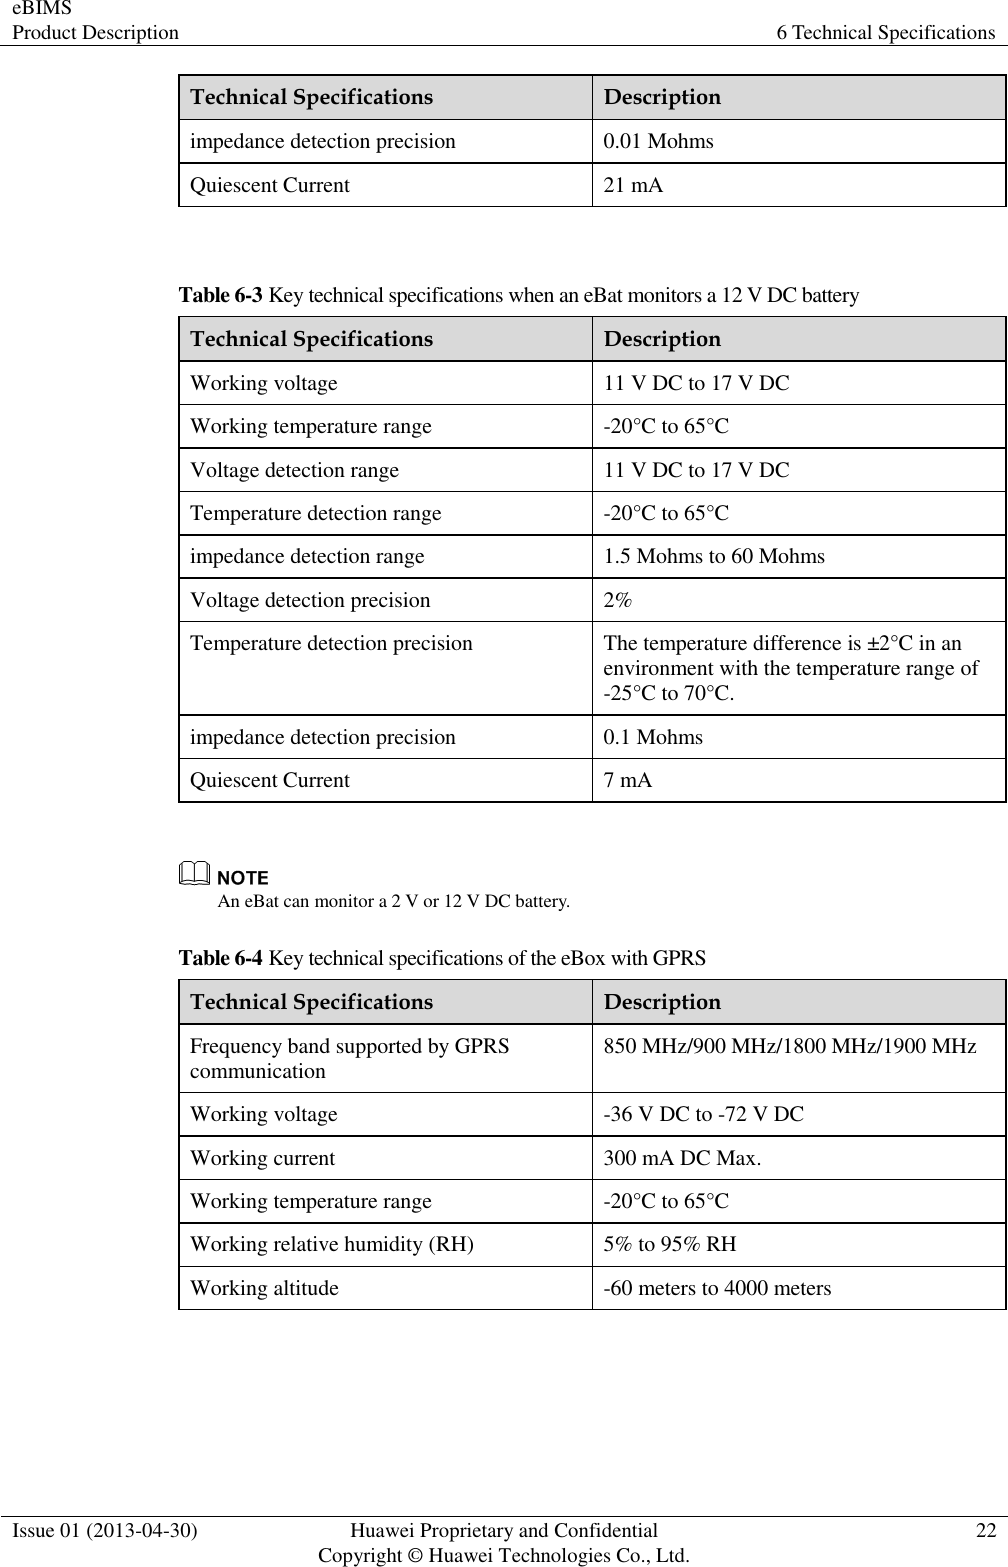 eBIMS Product Description 6 Technical Specifications  Issue 01 (2013-04-30) Huawei Proprietary and Confidential                                     Copyright © Huawei Technologies Co., Ltd. 22  Technical Specifications Description impedance detection precision 0.01 Mohms Quiescent Current 21 mA  Table 6-3 Key technical specifications when an eBat monitors a 12 V DC battery Technical Specifications Description Working voltage 11 V DC to 17 V DC Working temperature range -20°C to 65°C Voltage detection range 11 V DC to 17 V DC Temperature detection range -20°C to 65°C impedance detection range 1.5 Mohms to 60 Mohms Voltage detection precision 2% Temperature detection precision The temperature difference is ±2°C in an environment with the temperature range of -25°C to 70°C. impedance detection precision 0.1 Mohms Quiescent Current 7 mA   An eBat can monitor a 2 V or 12 V DC battery. Table 6-4 Key technical specifications of the eBox with GPRS Technical Specifications Description Frequency band supported by GPRS communication 850 MHz/900 MHz/1800 MHz/1900 MHz Working voltage -36 V DC to -72 V DC Working current 300 mA DC Max. Working temperature range -20°C to 65°C Working relative humidity (RH) 5% to 95% RH Working altitude -60 meters to 4000 meters  